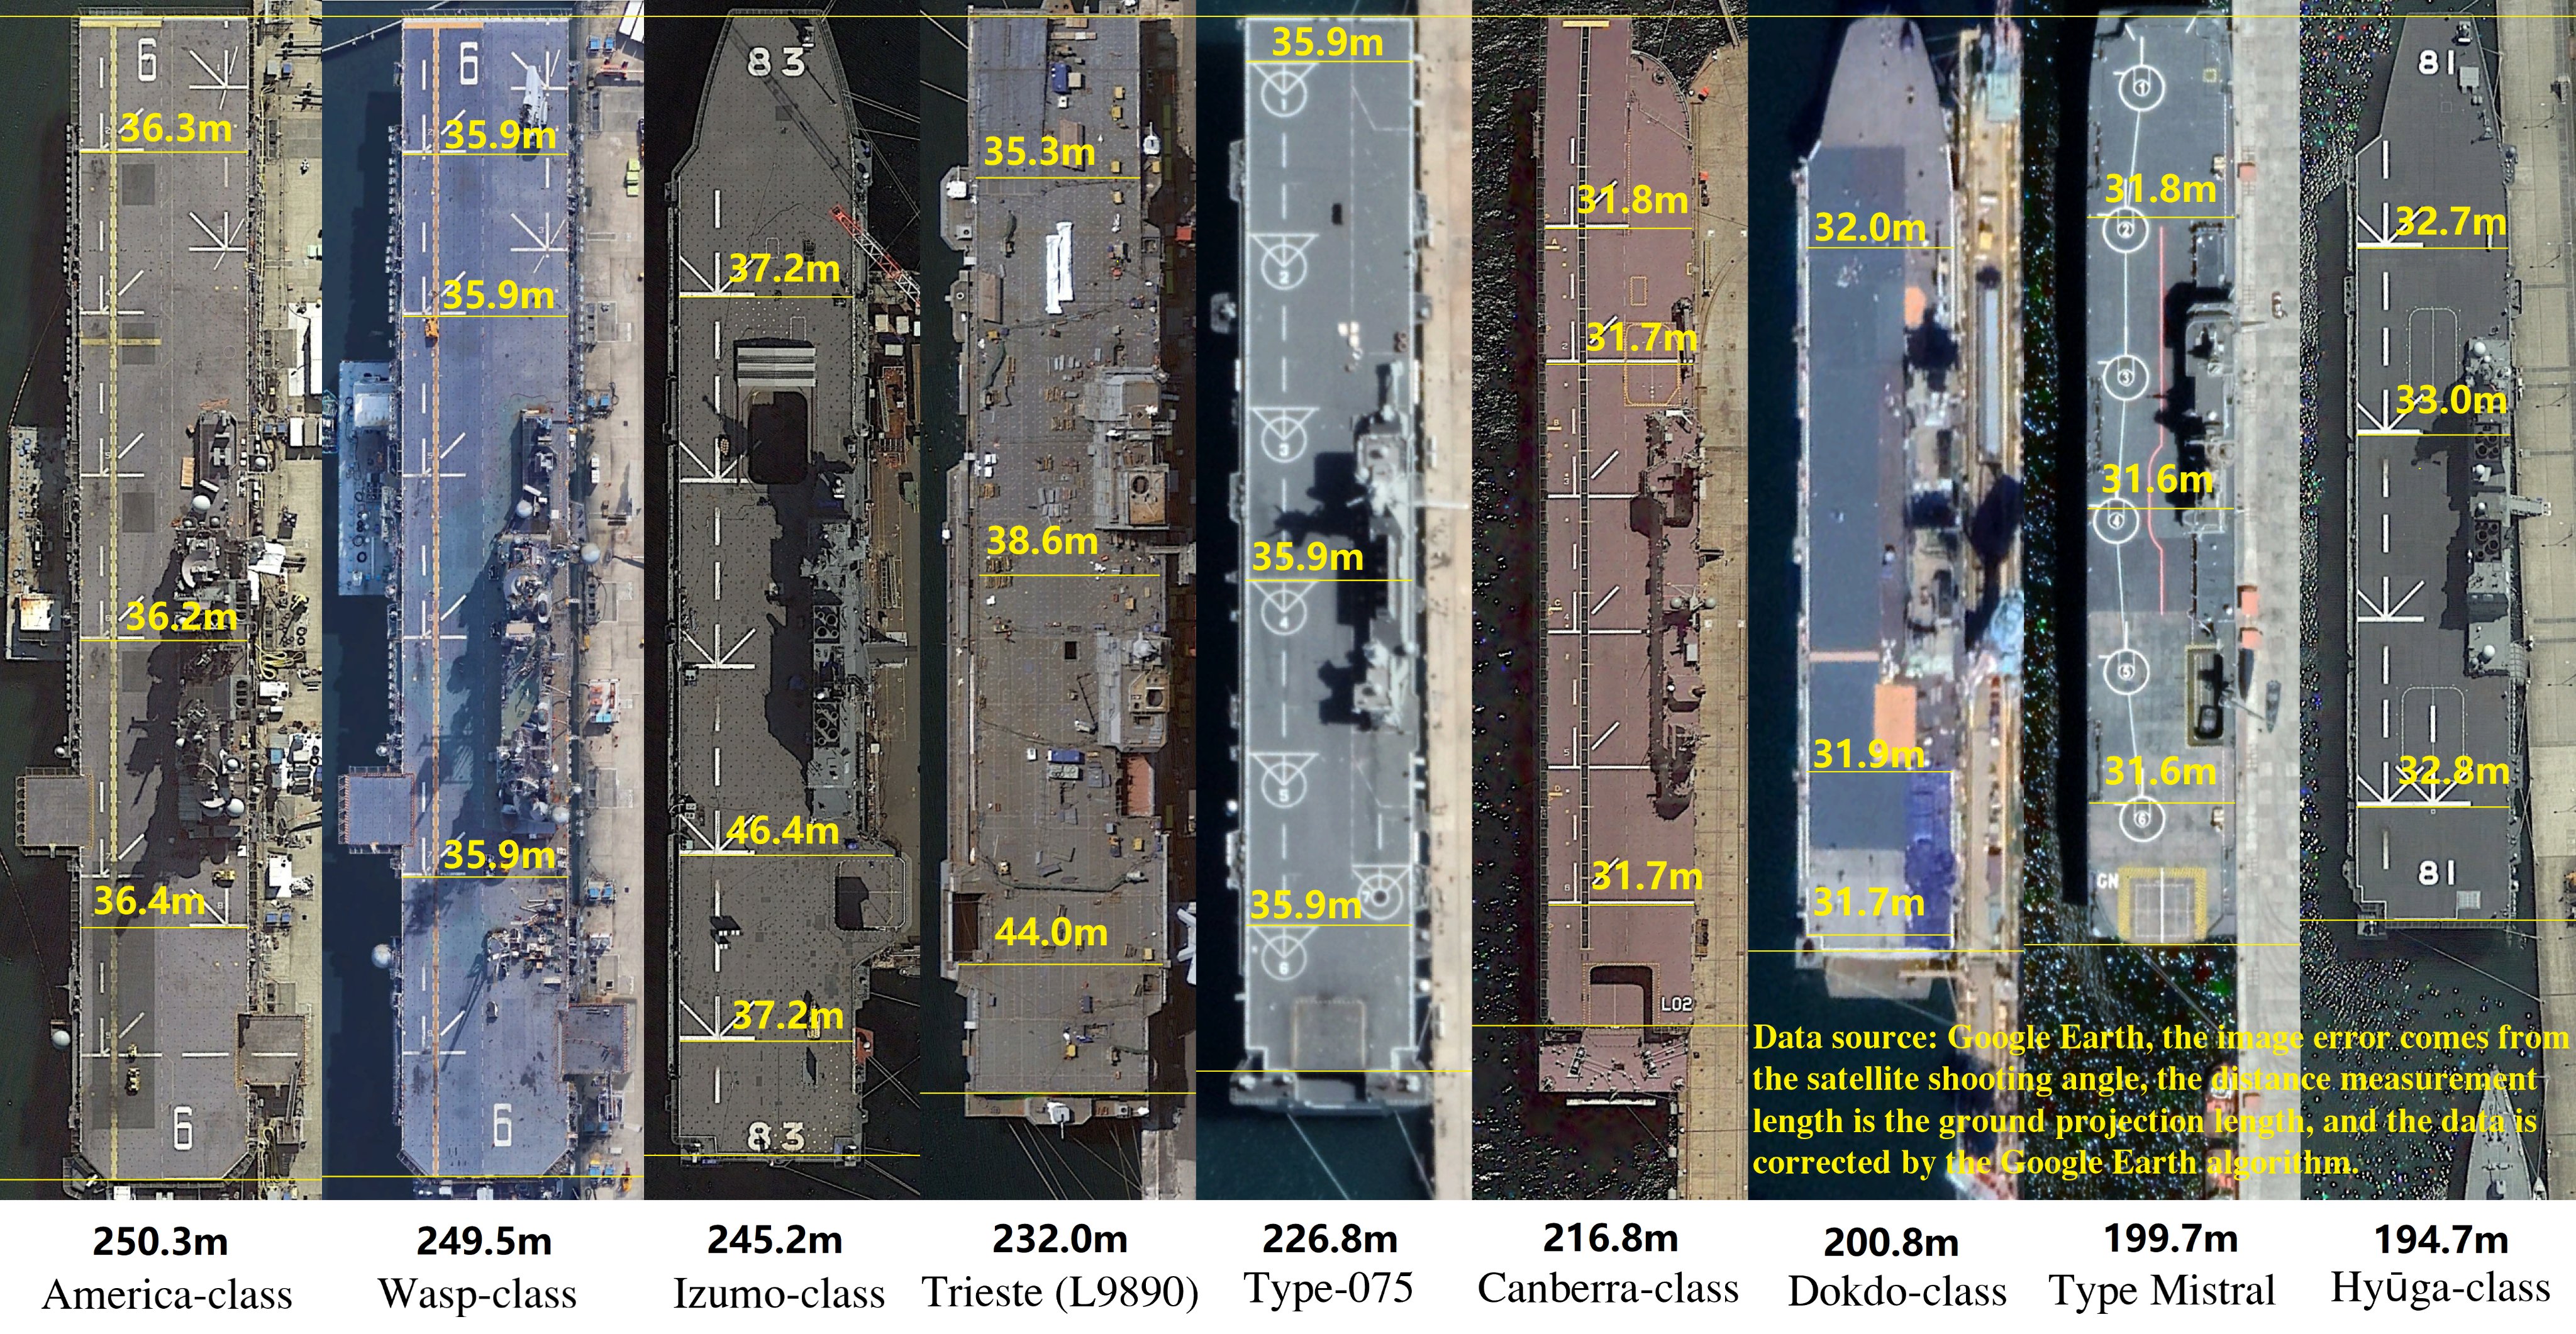 Side-by-side visual comparison of the world's amphibious assault ship